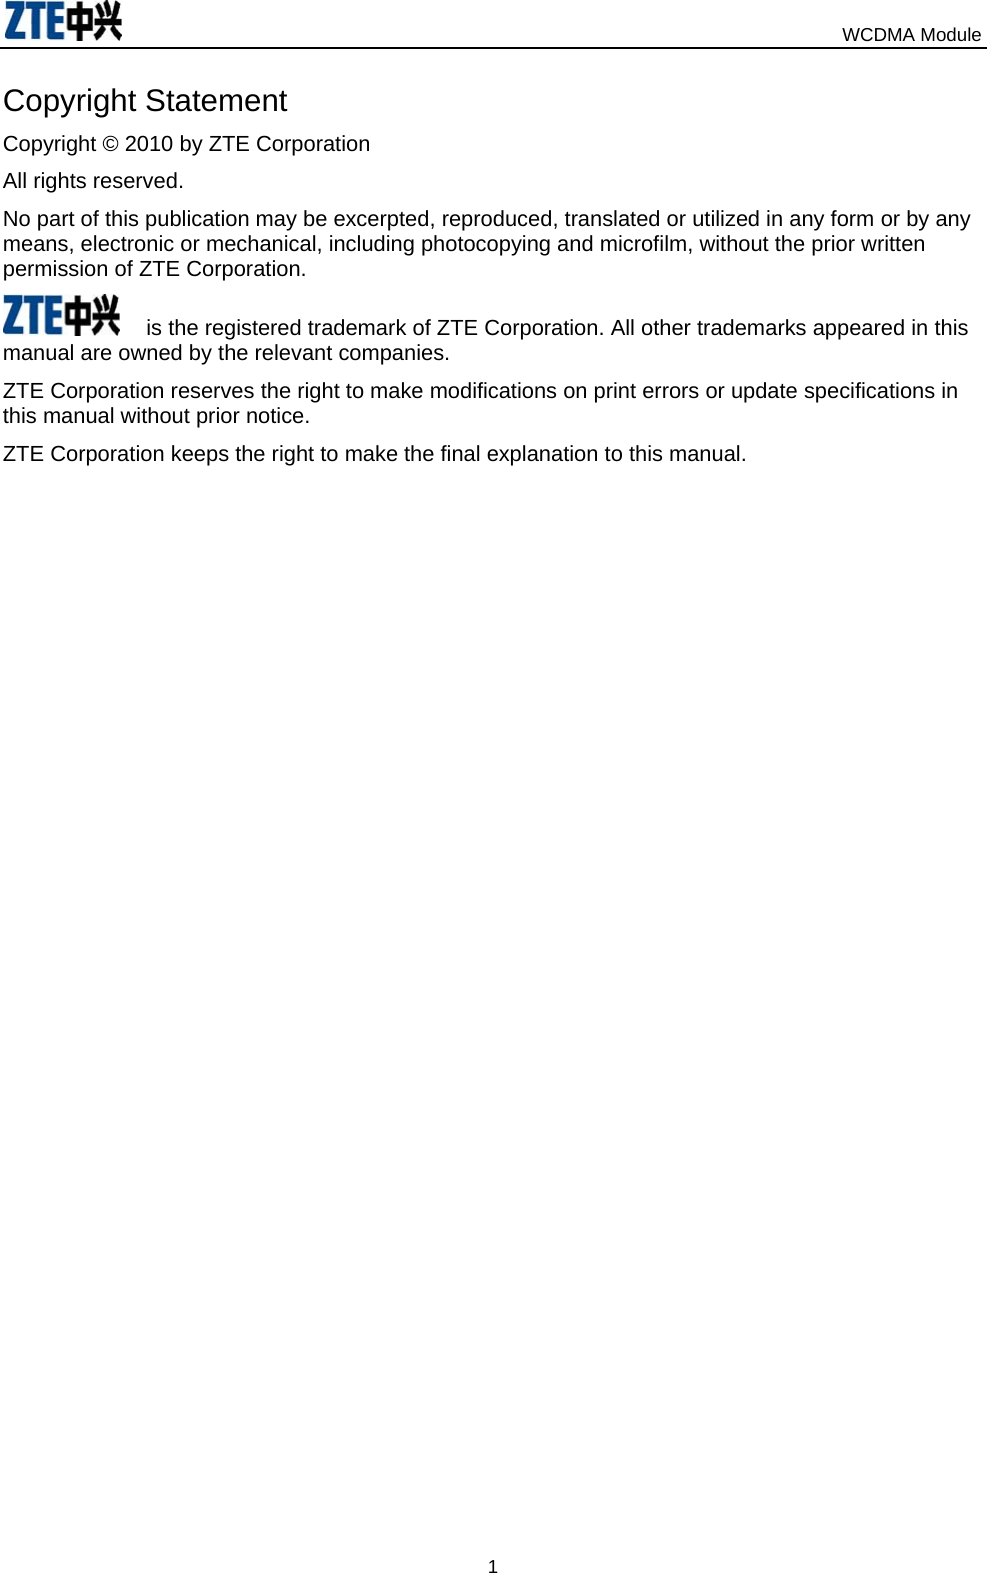                                                                            WCDMA Module  1Copyright Statement Copyright © 2010 by ZTE Corporation All rights reserved. No part of this publication may be excerpted, reproduced, translated or utilized in any form or by any means, electronic or mechanical, including photocopying and microfilm, without the prior written permission of ZTE Corporation.  is the registered trademark of ZTE Corporation. All other trademarks appeared in this manual are owned by the relevant companies. ZTE Corporation reserves the right to make modifications on print errors or update specifications in this manual without prior notice.   ZTE Corporation keeps the right to make the final explanation to this manual. 